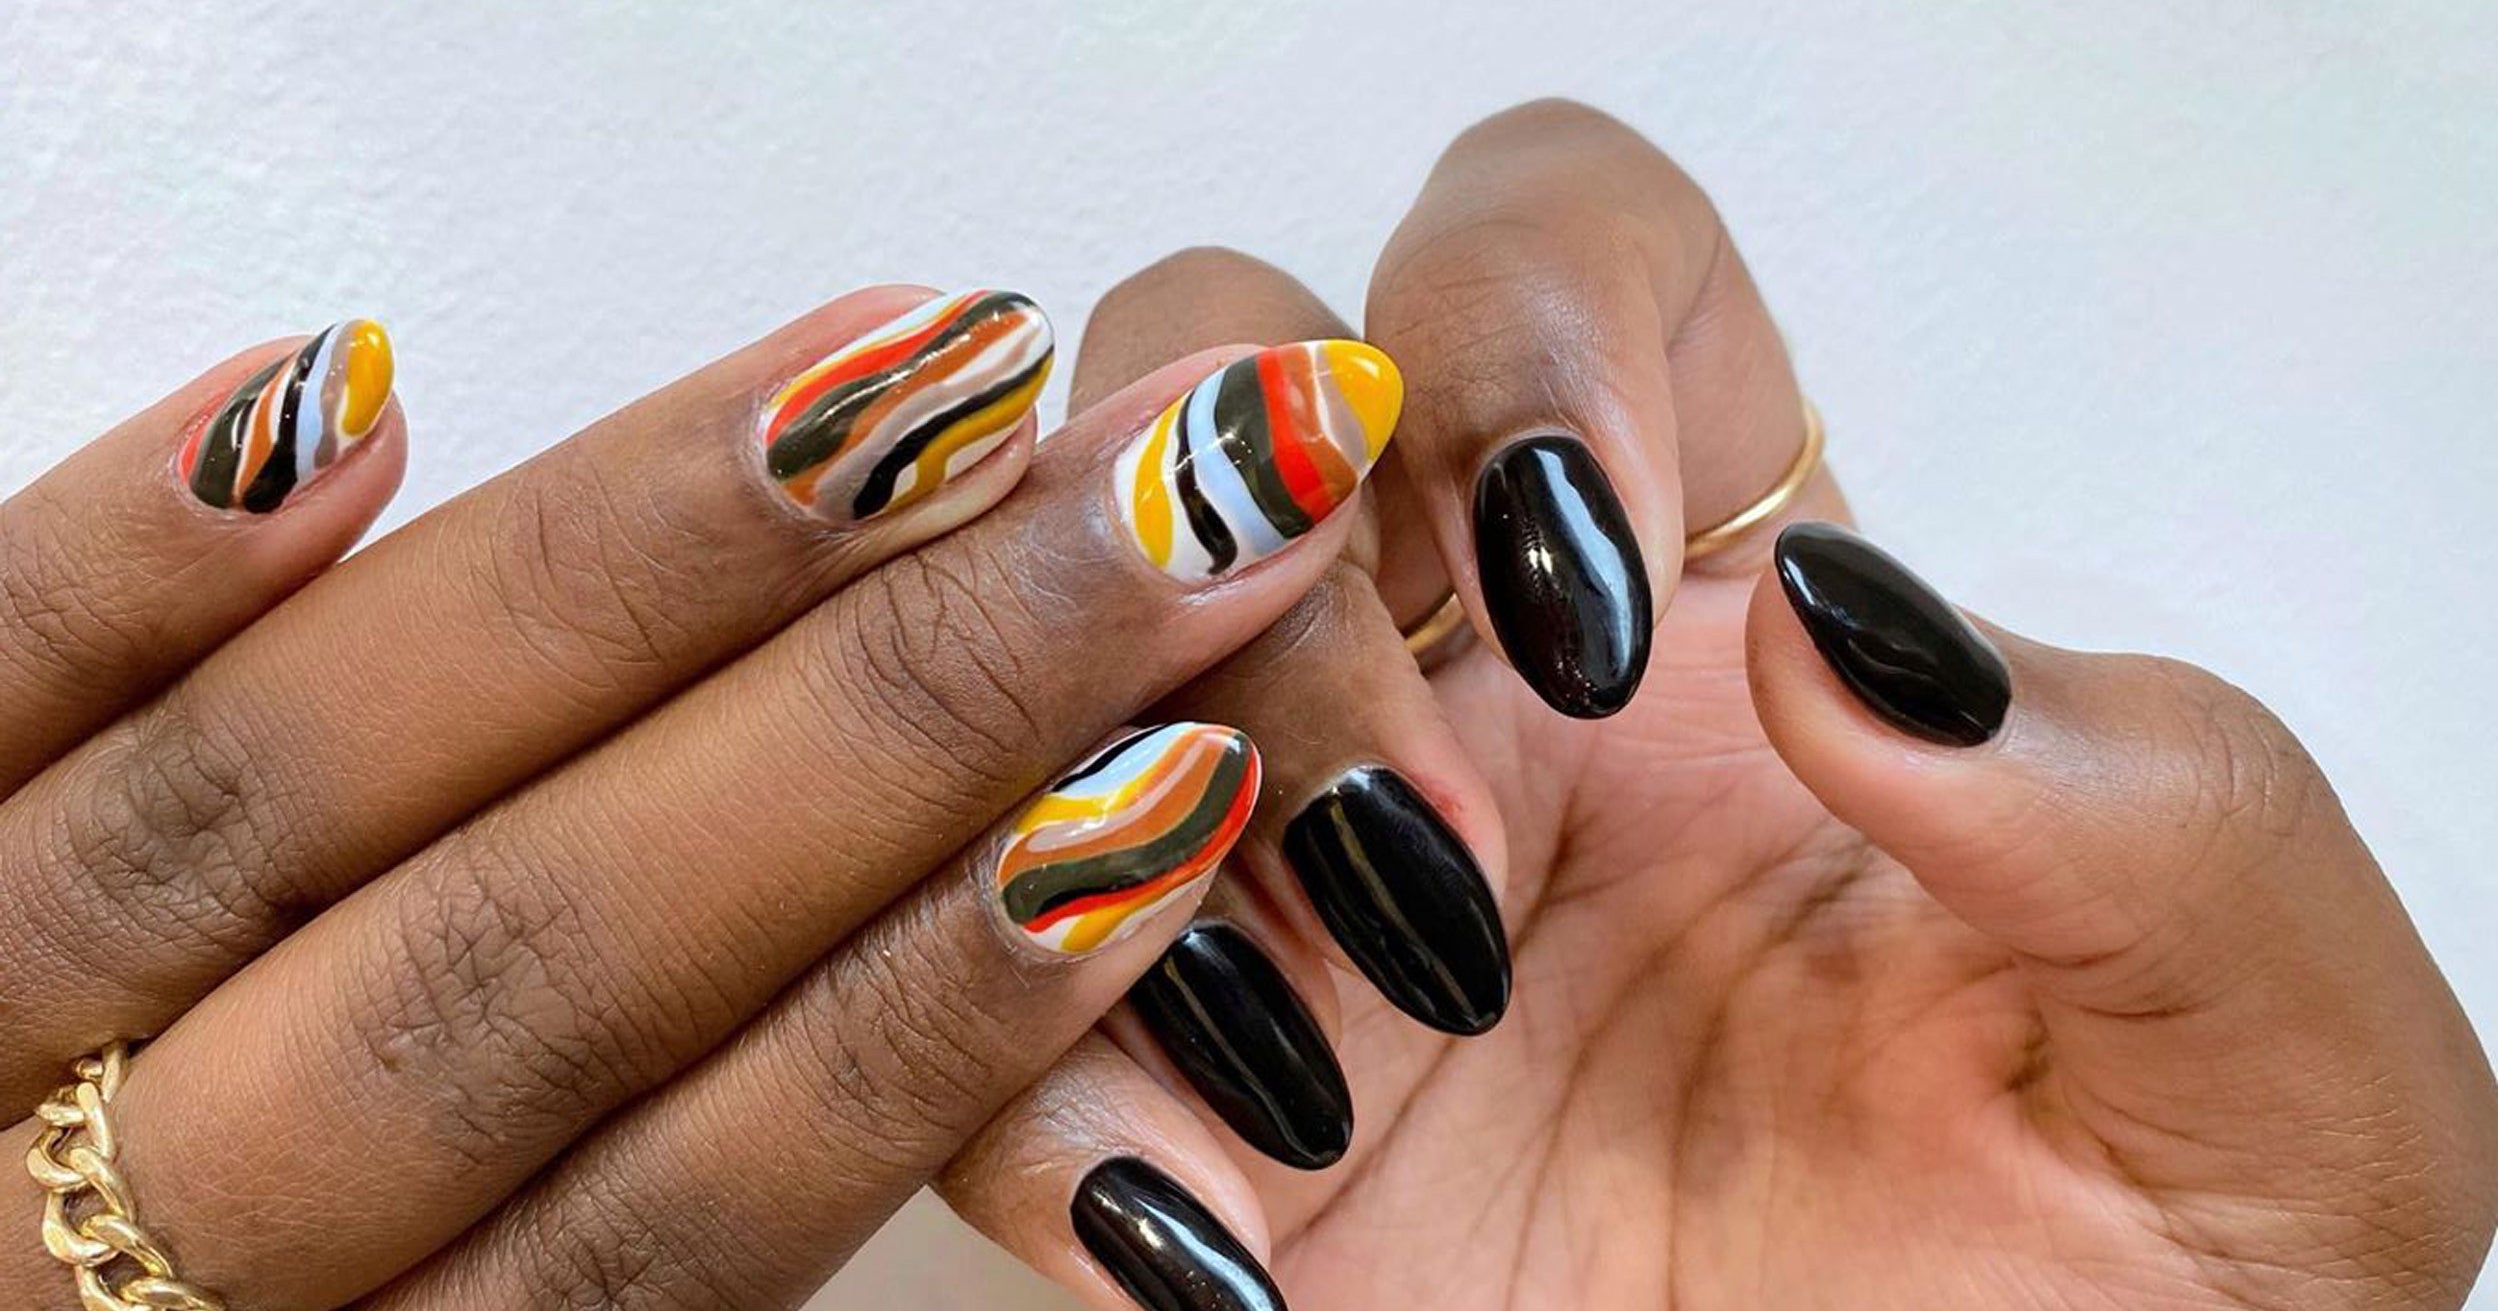 6. "2020 Summer Nail Trends: Color Edition" - wide 7